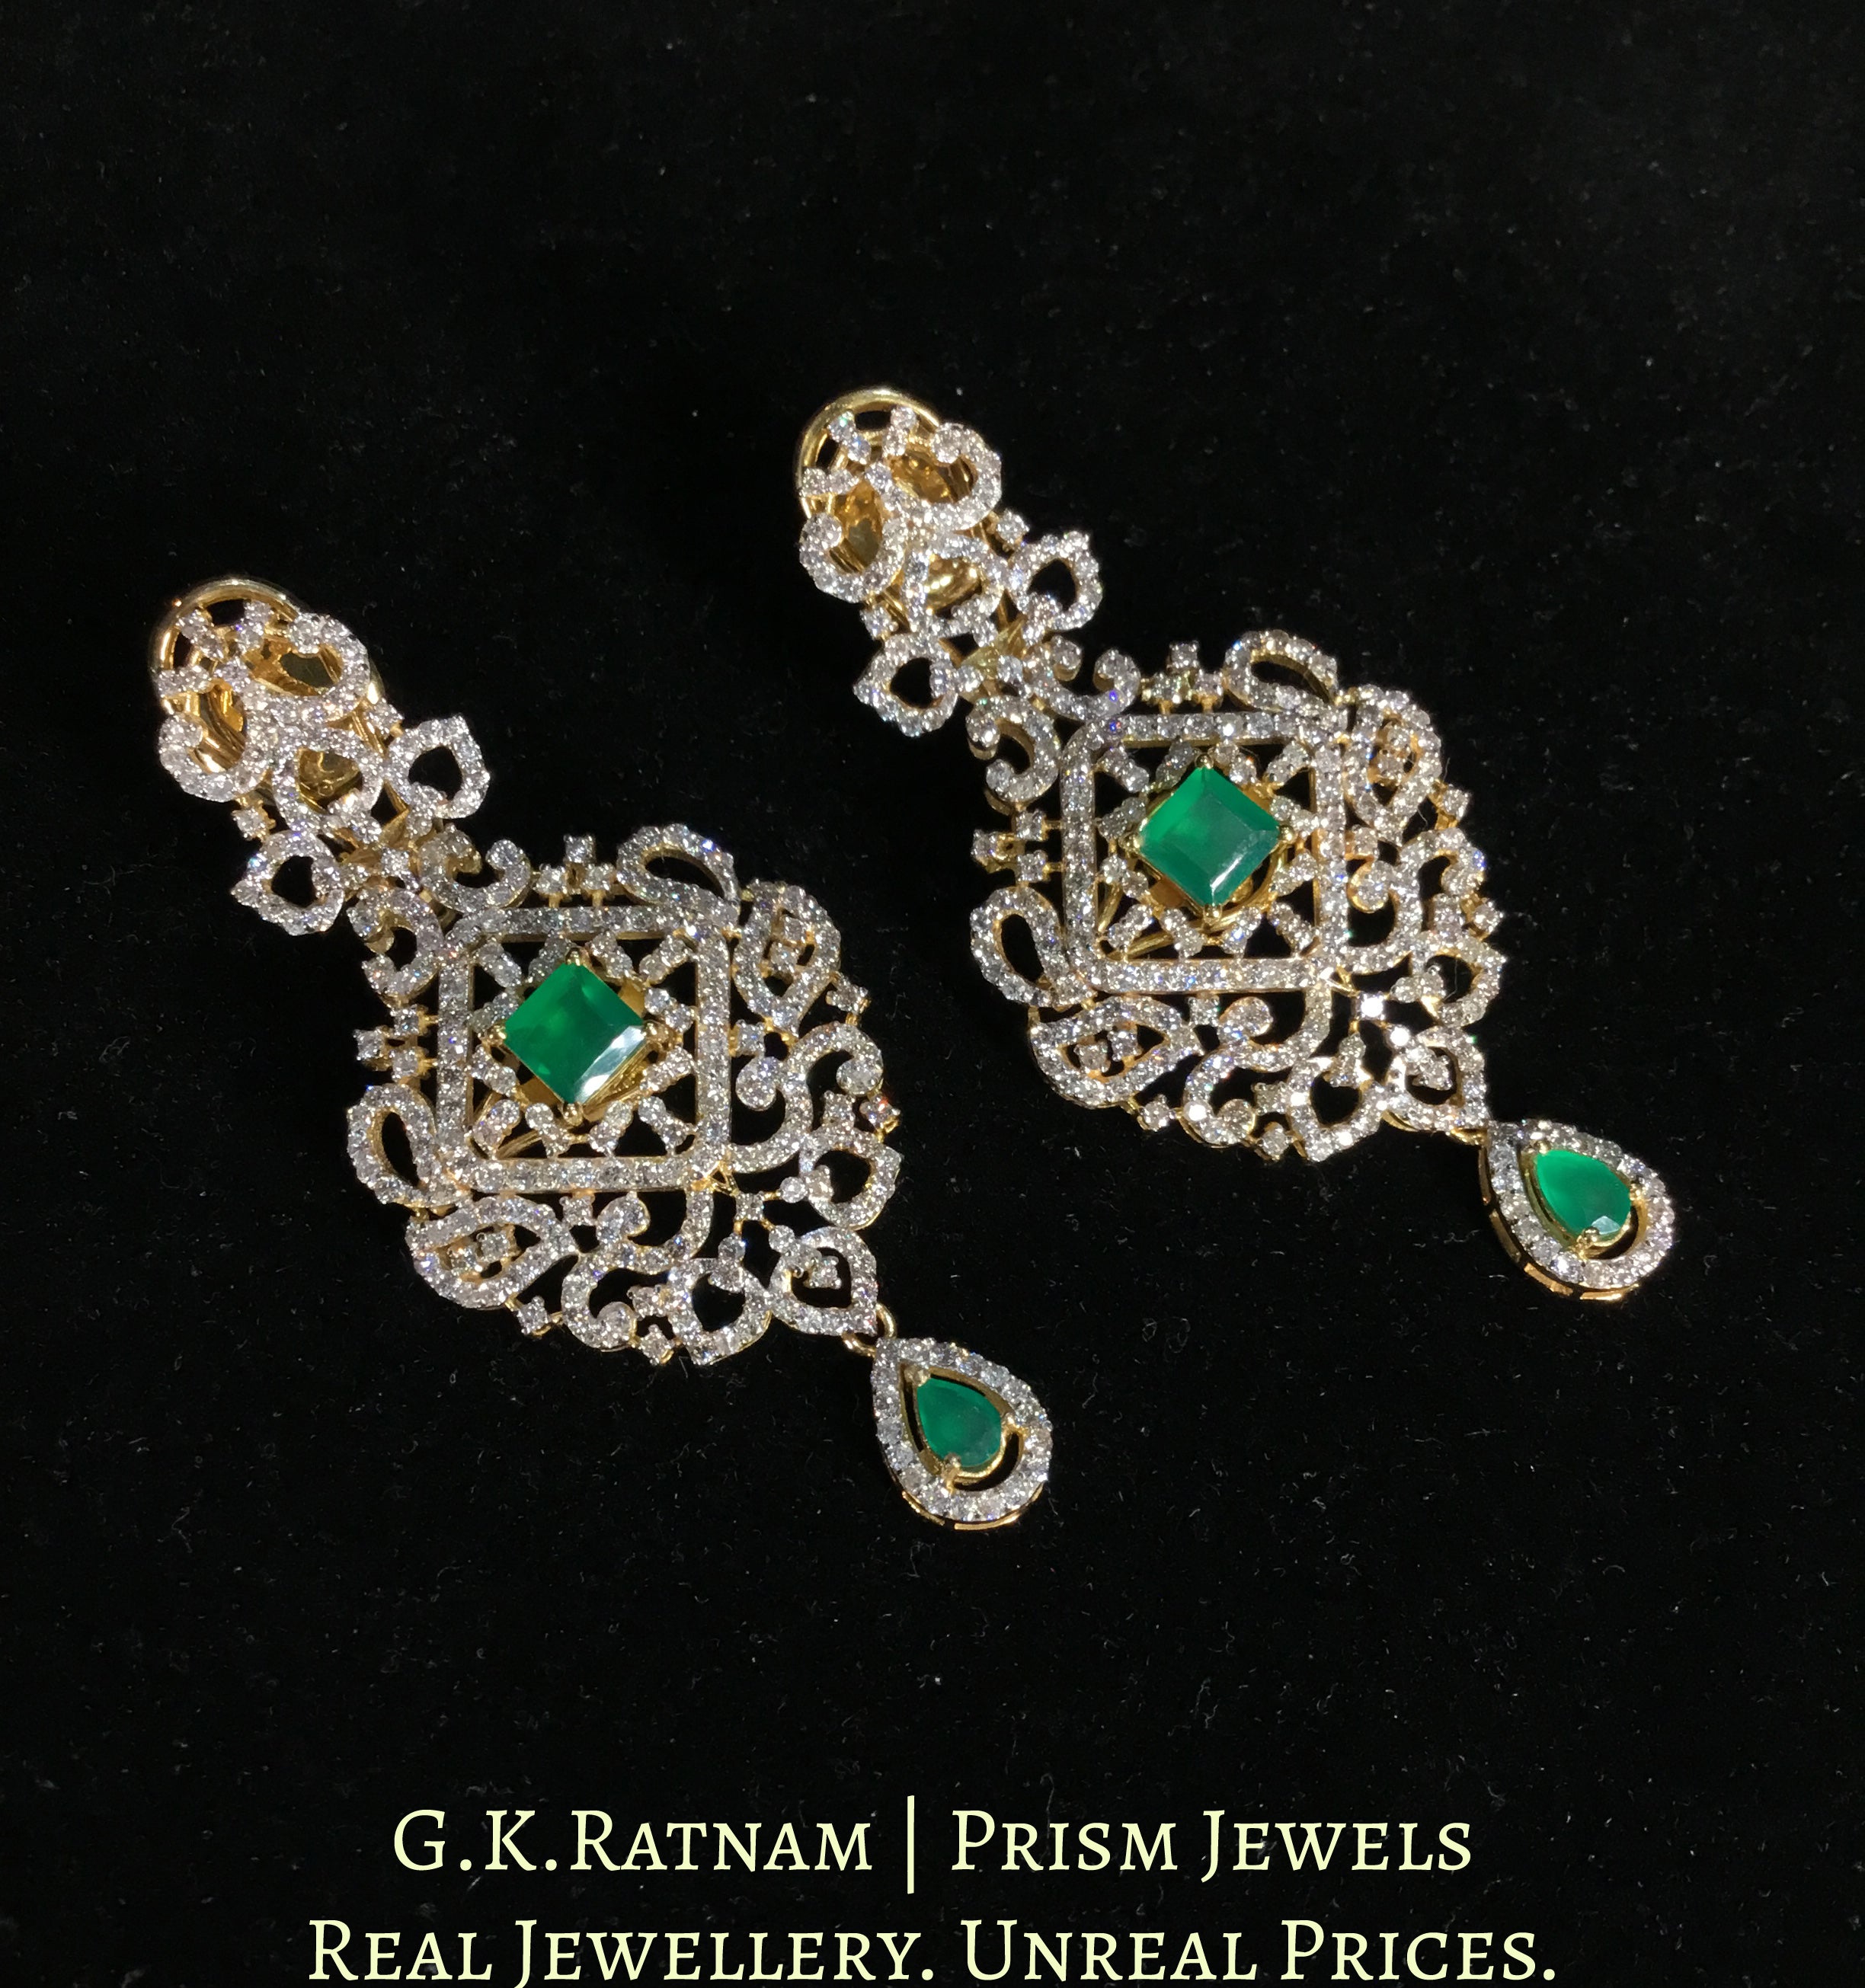 14k Gold and Diamond Long Earring Pair With Emerald-Green Stones